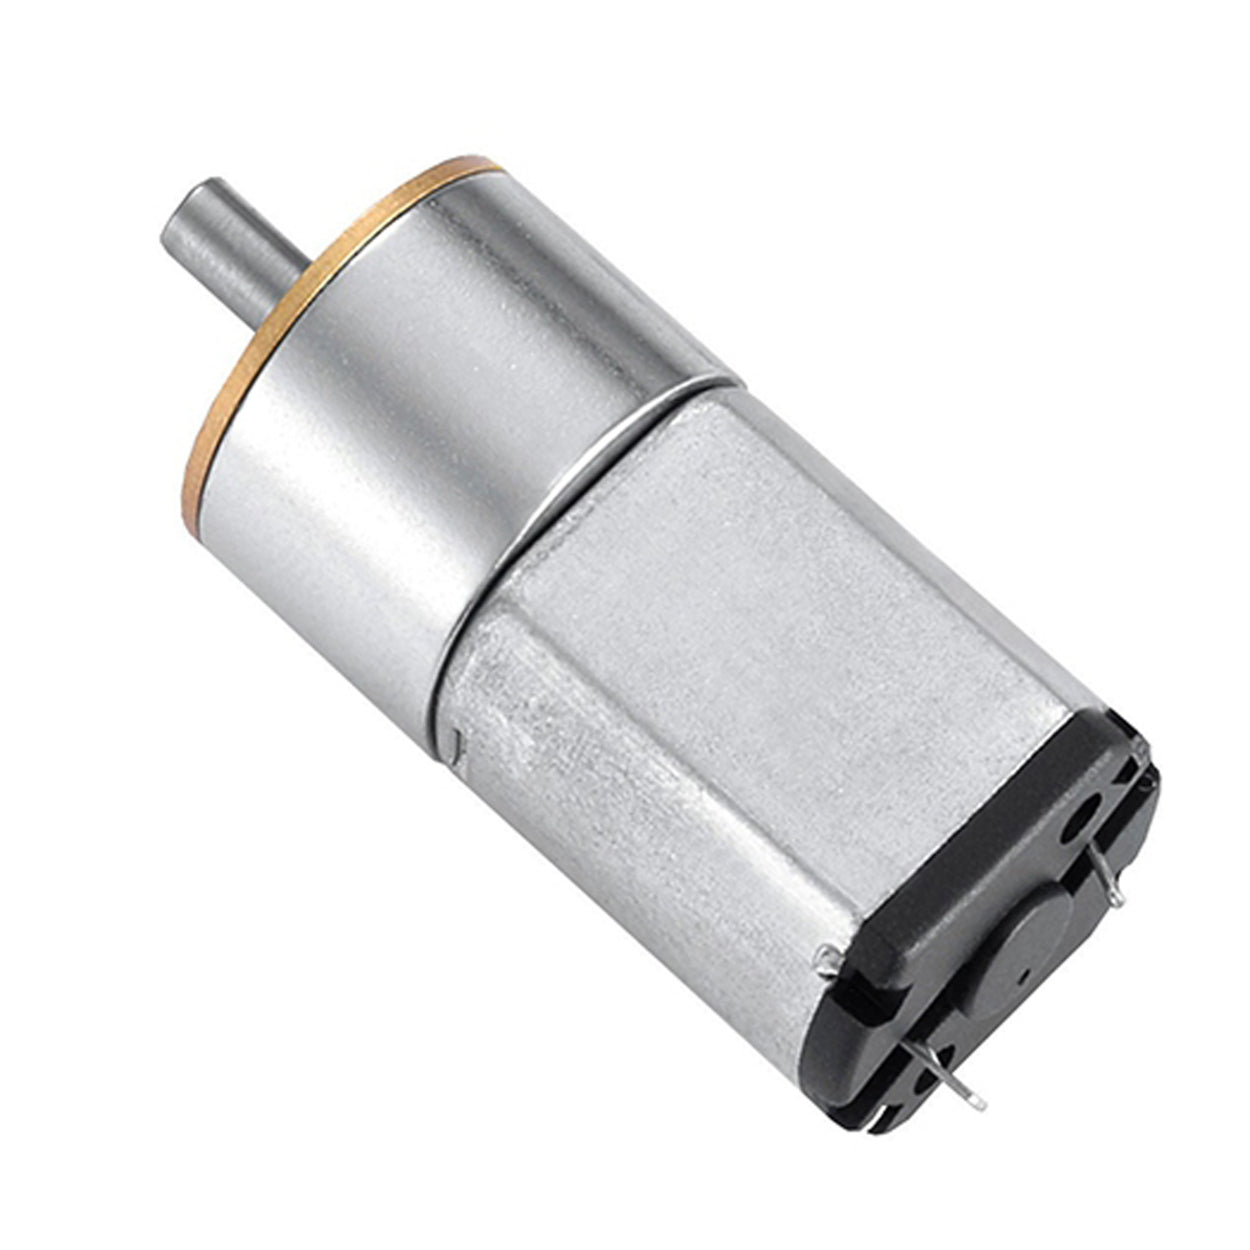 Steel Micro Motor 3-12V 450-1350RPM Large Torque, Performance, Stability, Low Noise